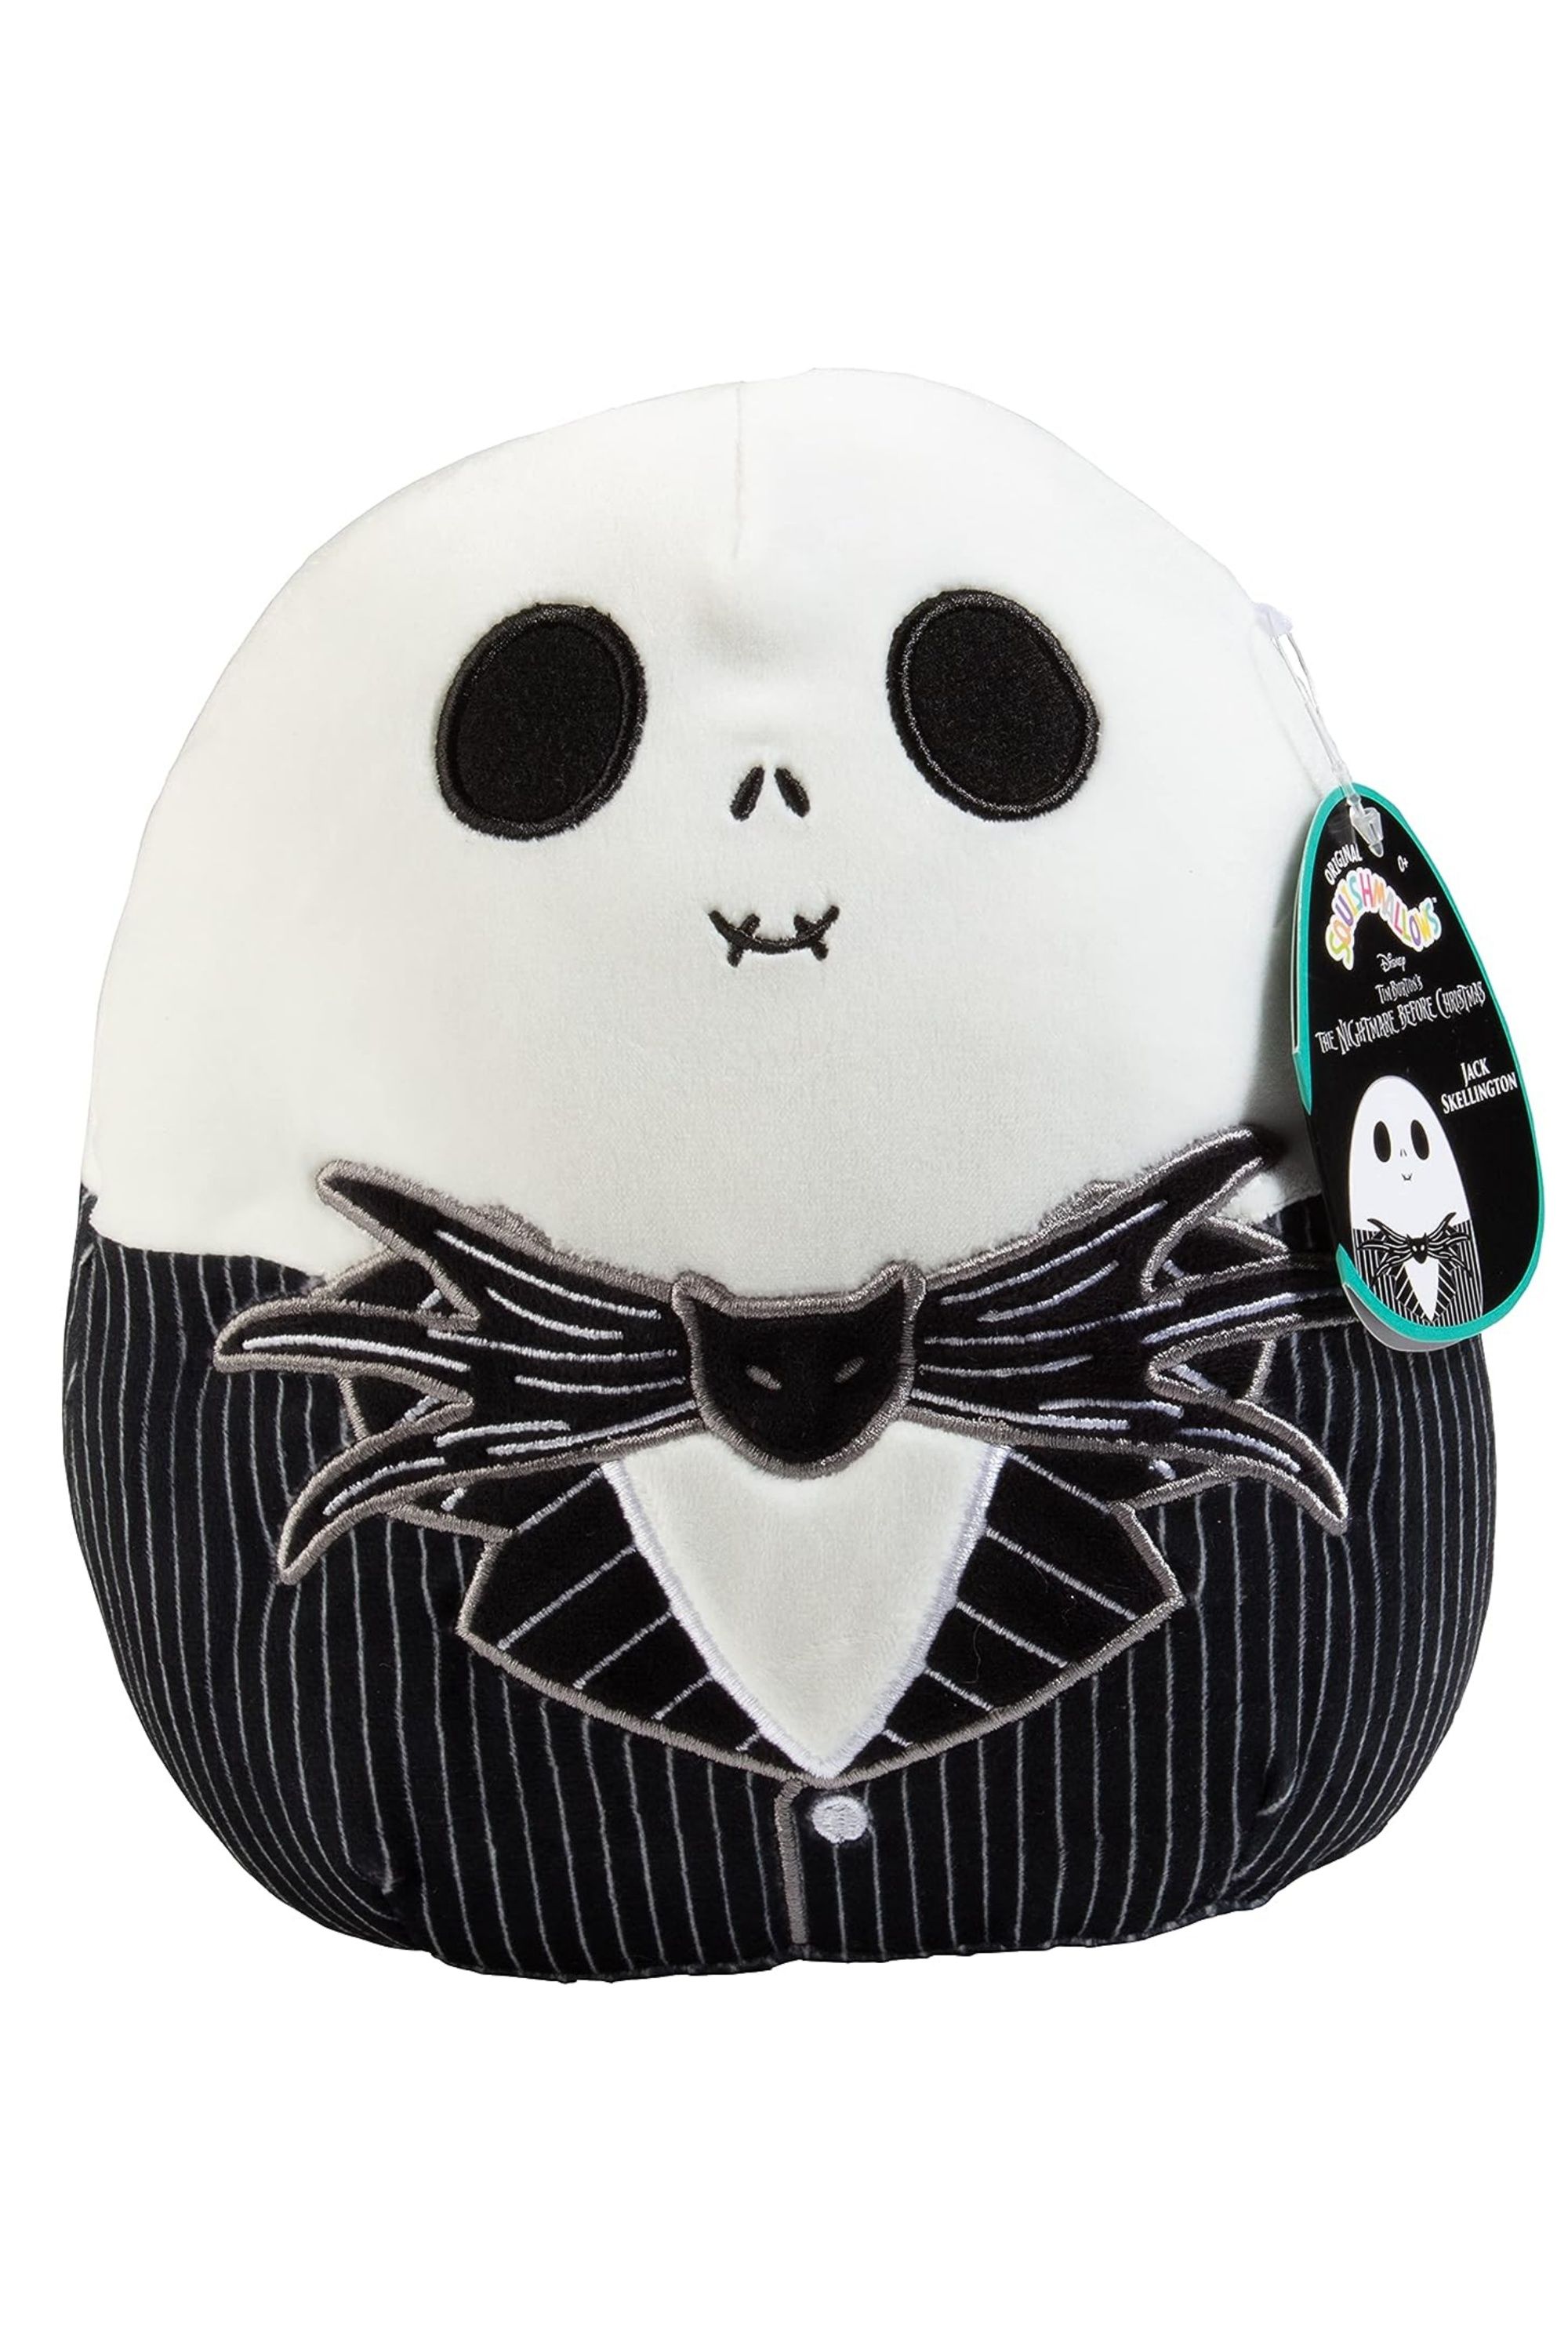 Jack Skellington The Nightmare Before Christmas Squishmallow